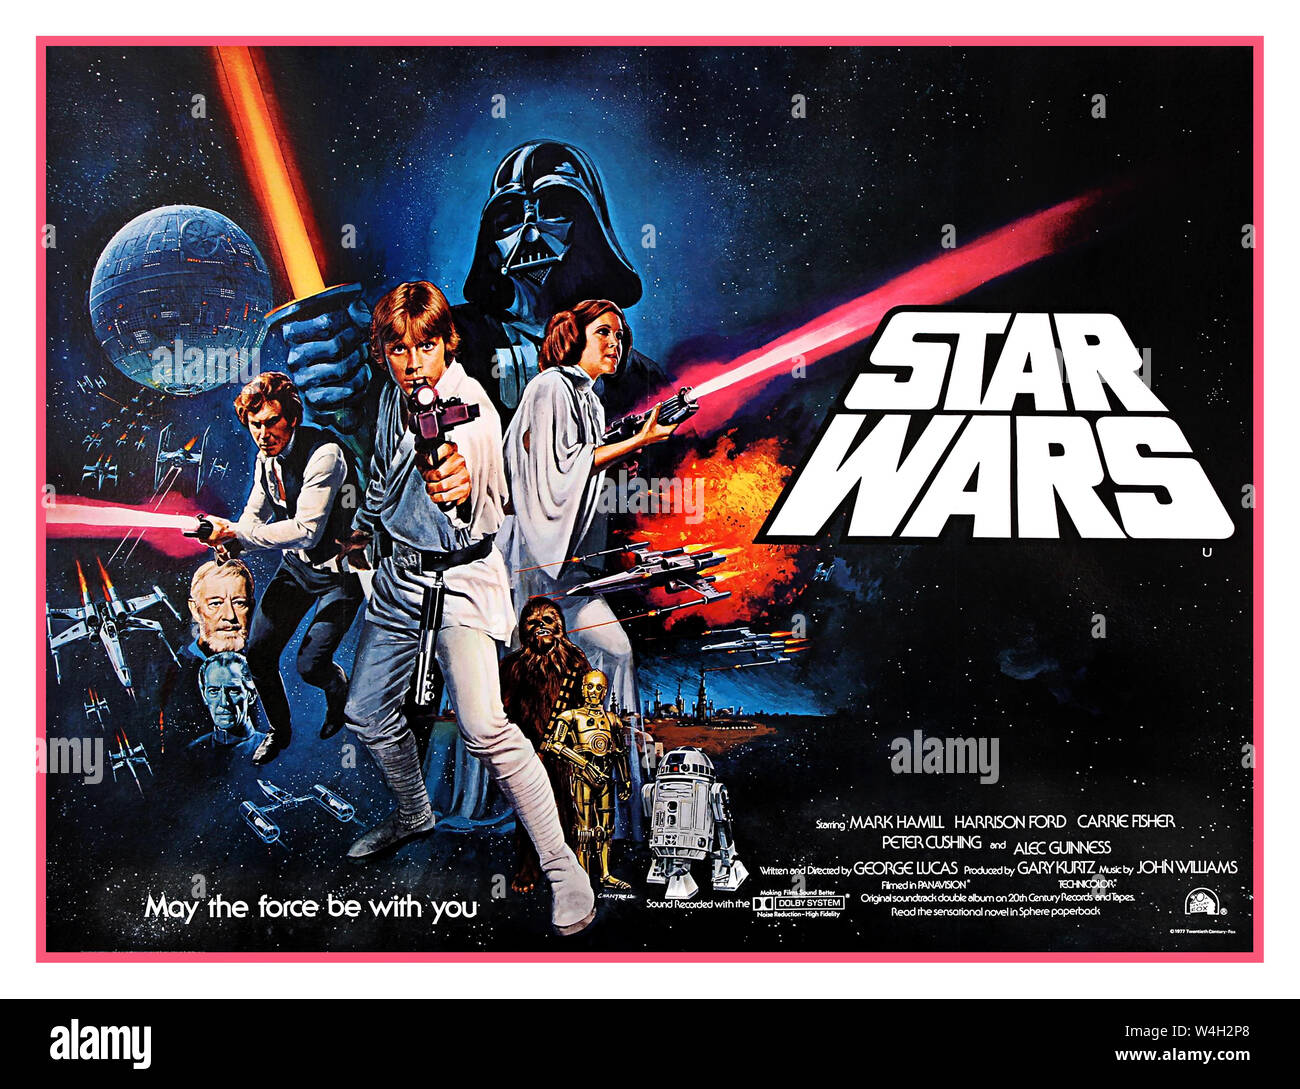 Star Wars 1977 UK 1970's film movie cinema poster for the debut of 'Star Wars' (1977). Star Wars (20th Century Fox, 1978). British Quad Poster Star Wars (also known as Star Wars: Episode IV – A New Hope) is a 1977 American epic space-opera film written and directed by George Lucas. It is the first film in the original Star Wars trilogy and the beginning of the Star Wars franchise. Starring Mark Hamill, Harrison Ford, Carrie Fisher, Peter Cushing, Alec Guinness, David Prowse, James Earl Jones, Anthony Daniels, Kenny Baker, and Peter Mayhew, music John Williams directed by George Lucas Stock Photo